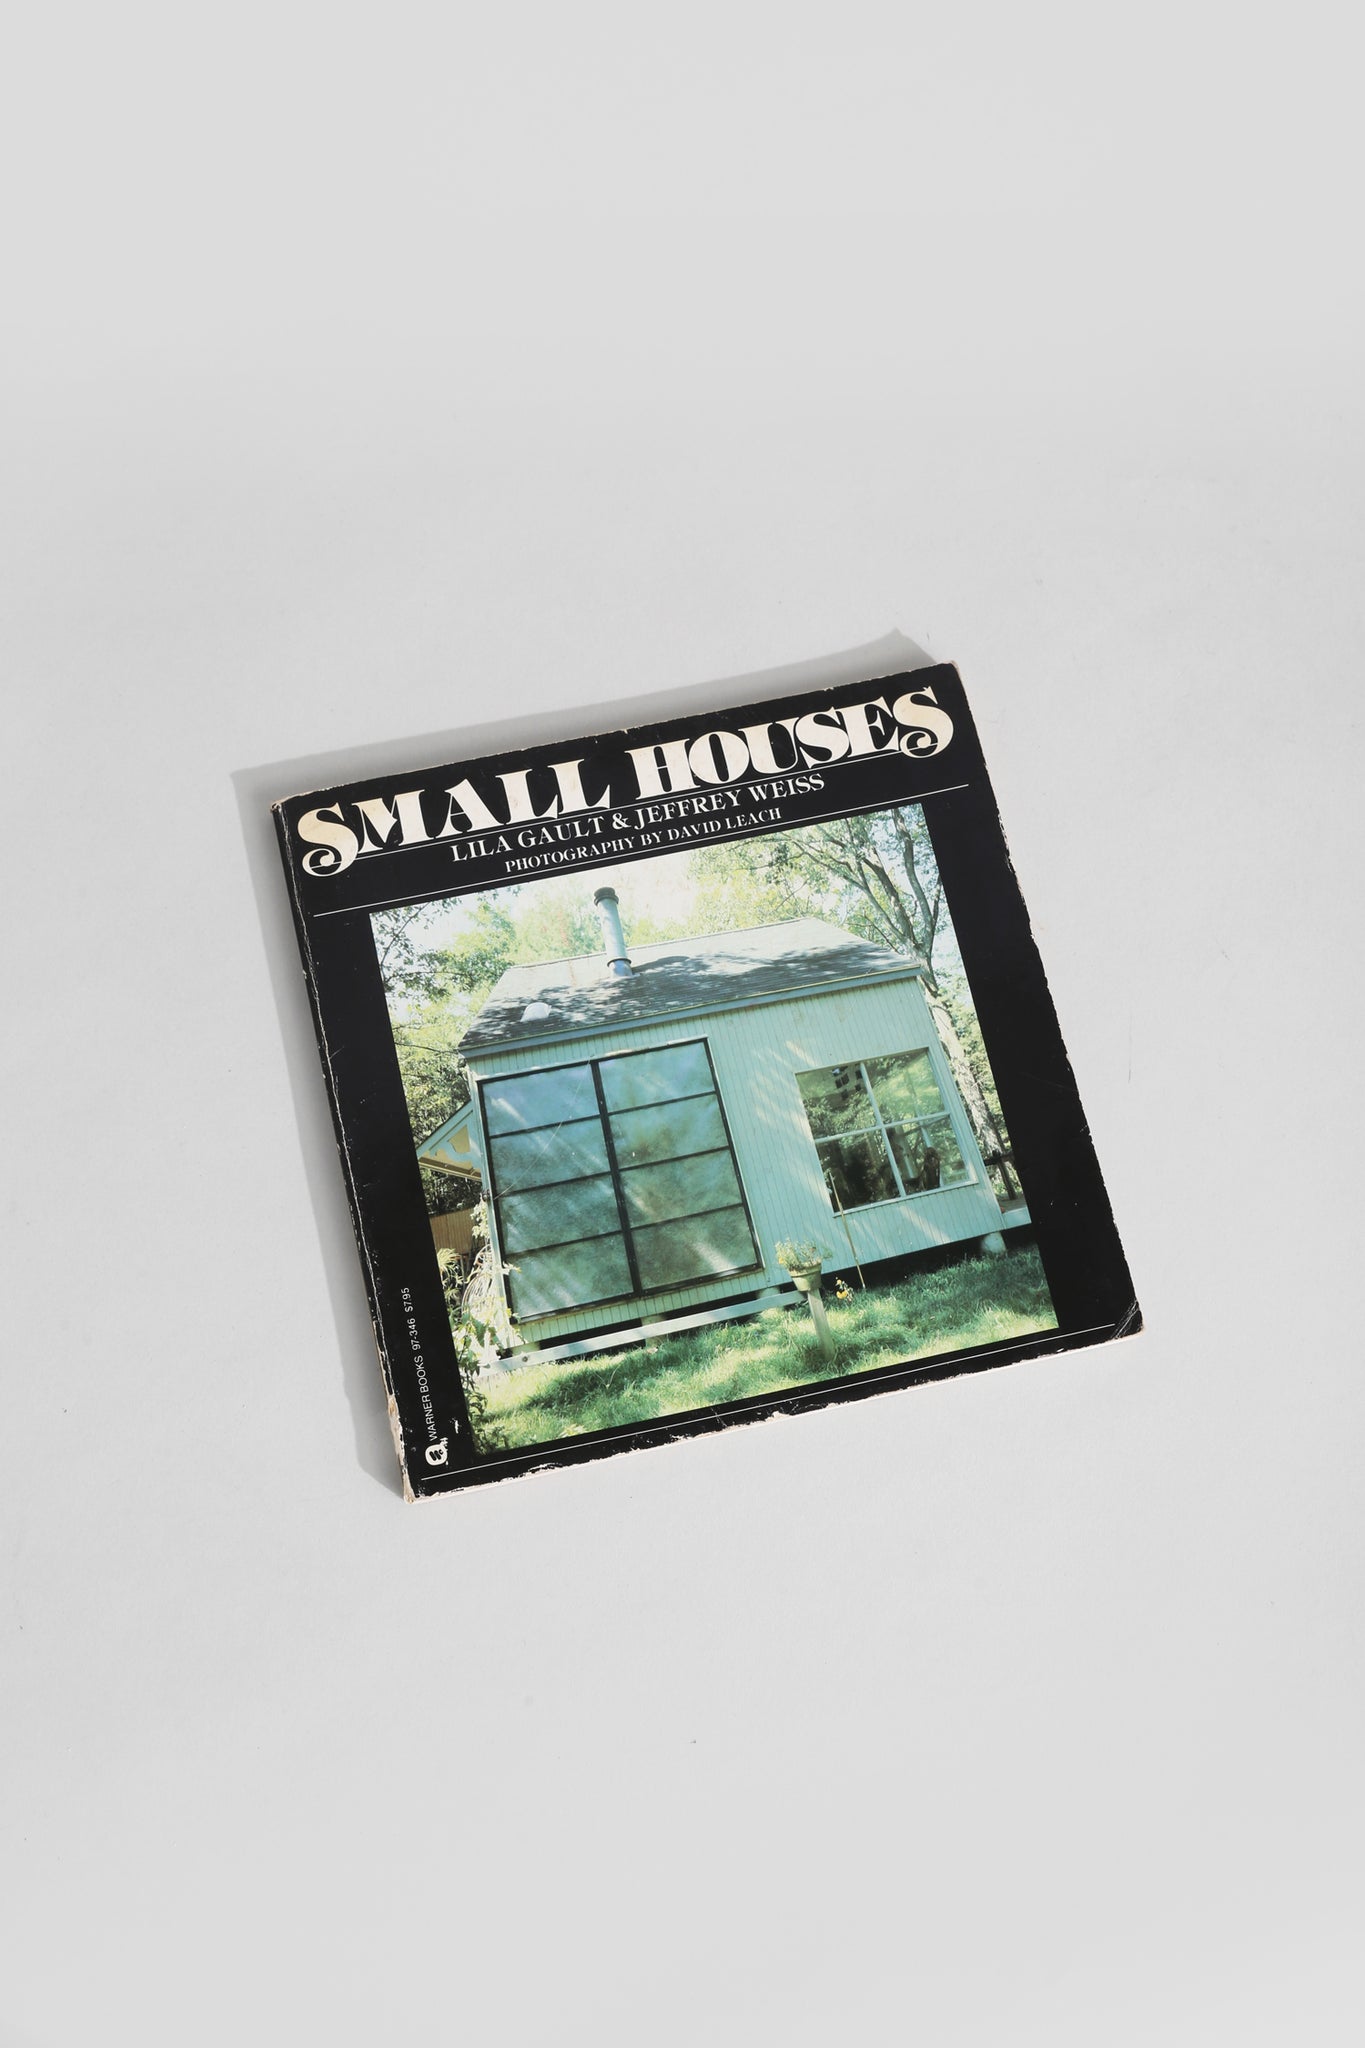 Small Houses Book